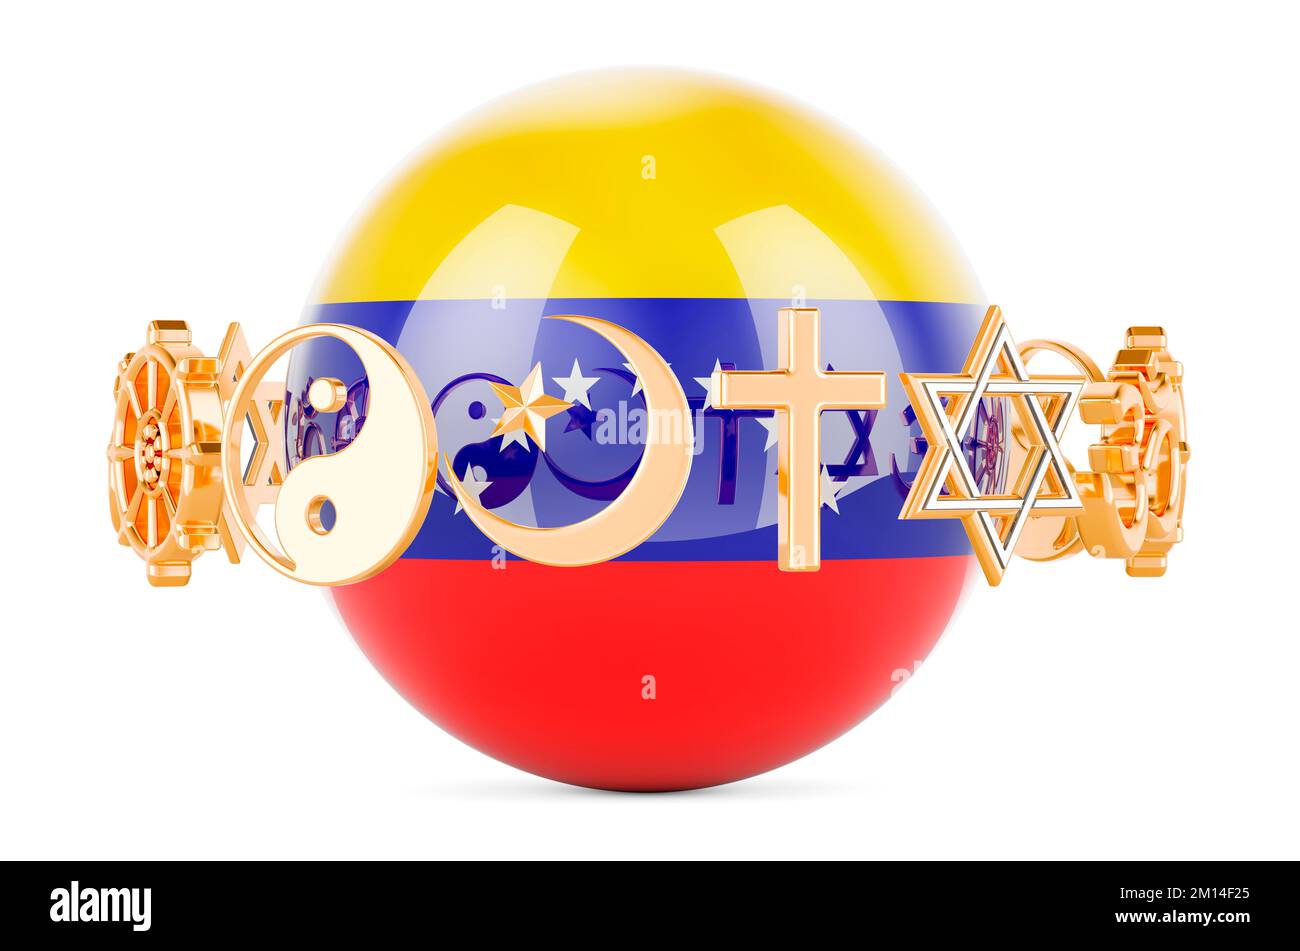 Venezuelan flag painted on sphere with religions symbols around, 3D rendering isolated on white background Stock Photo